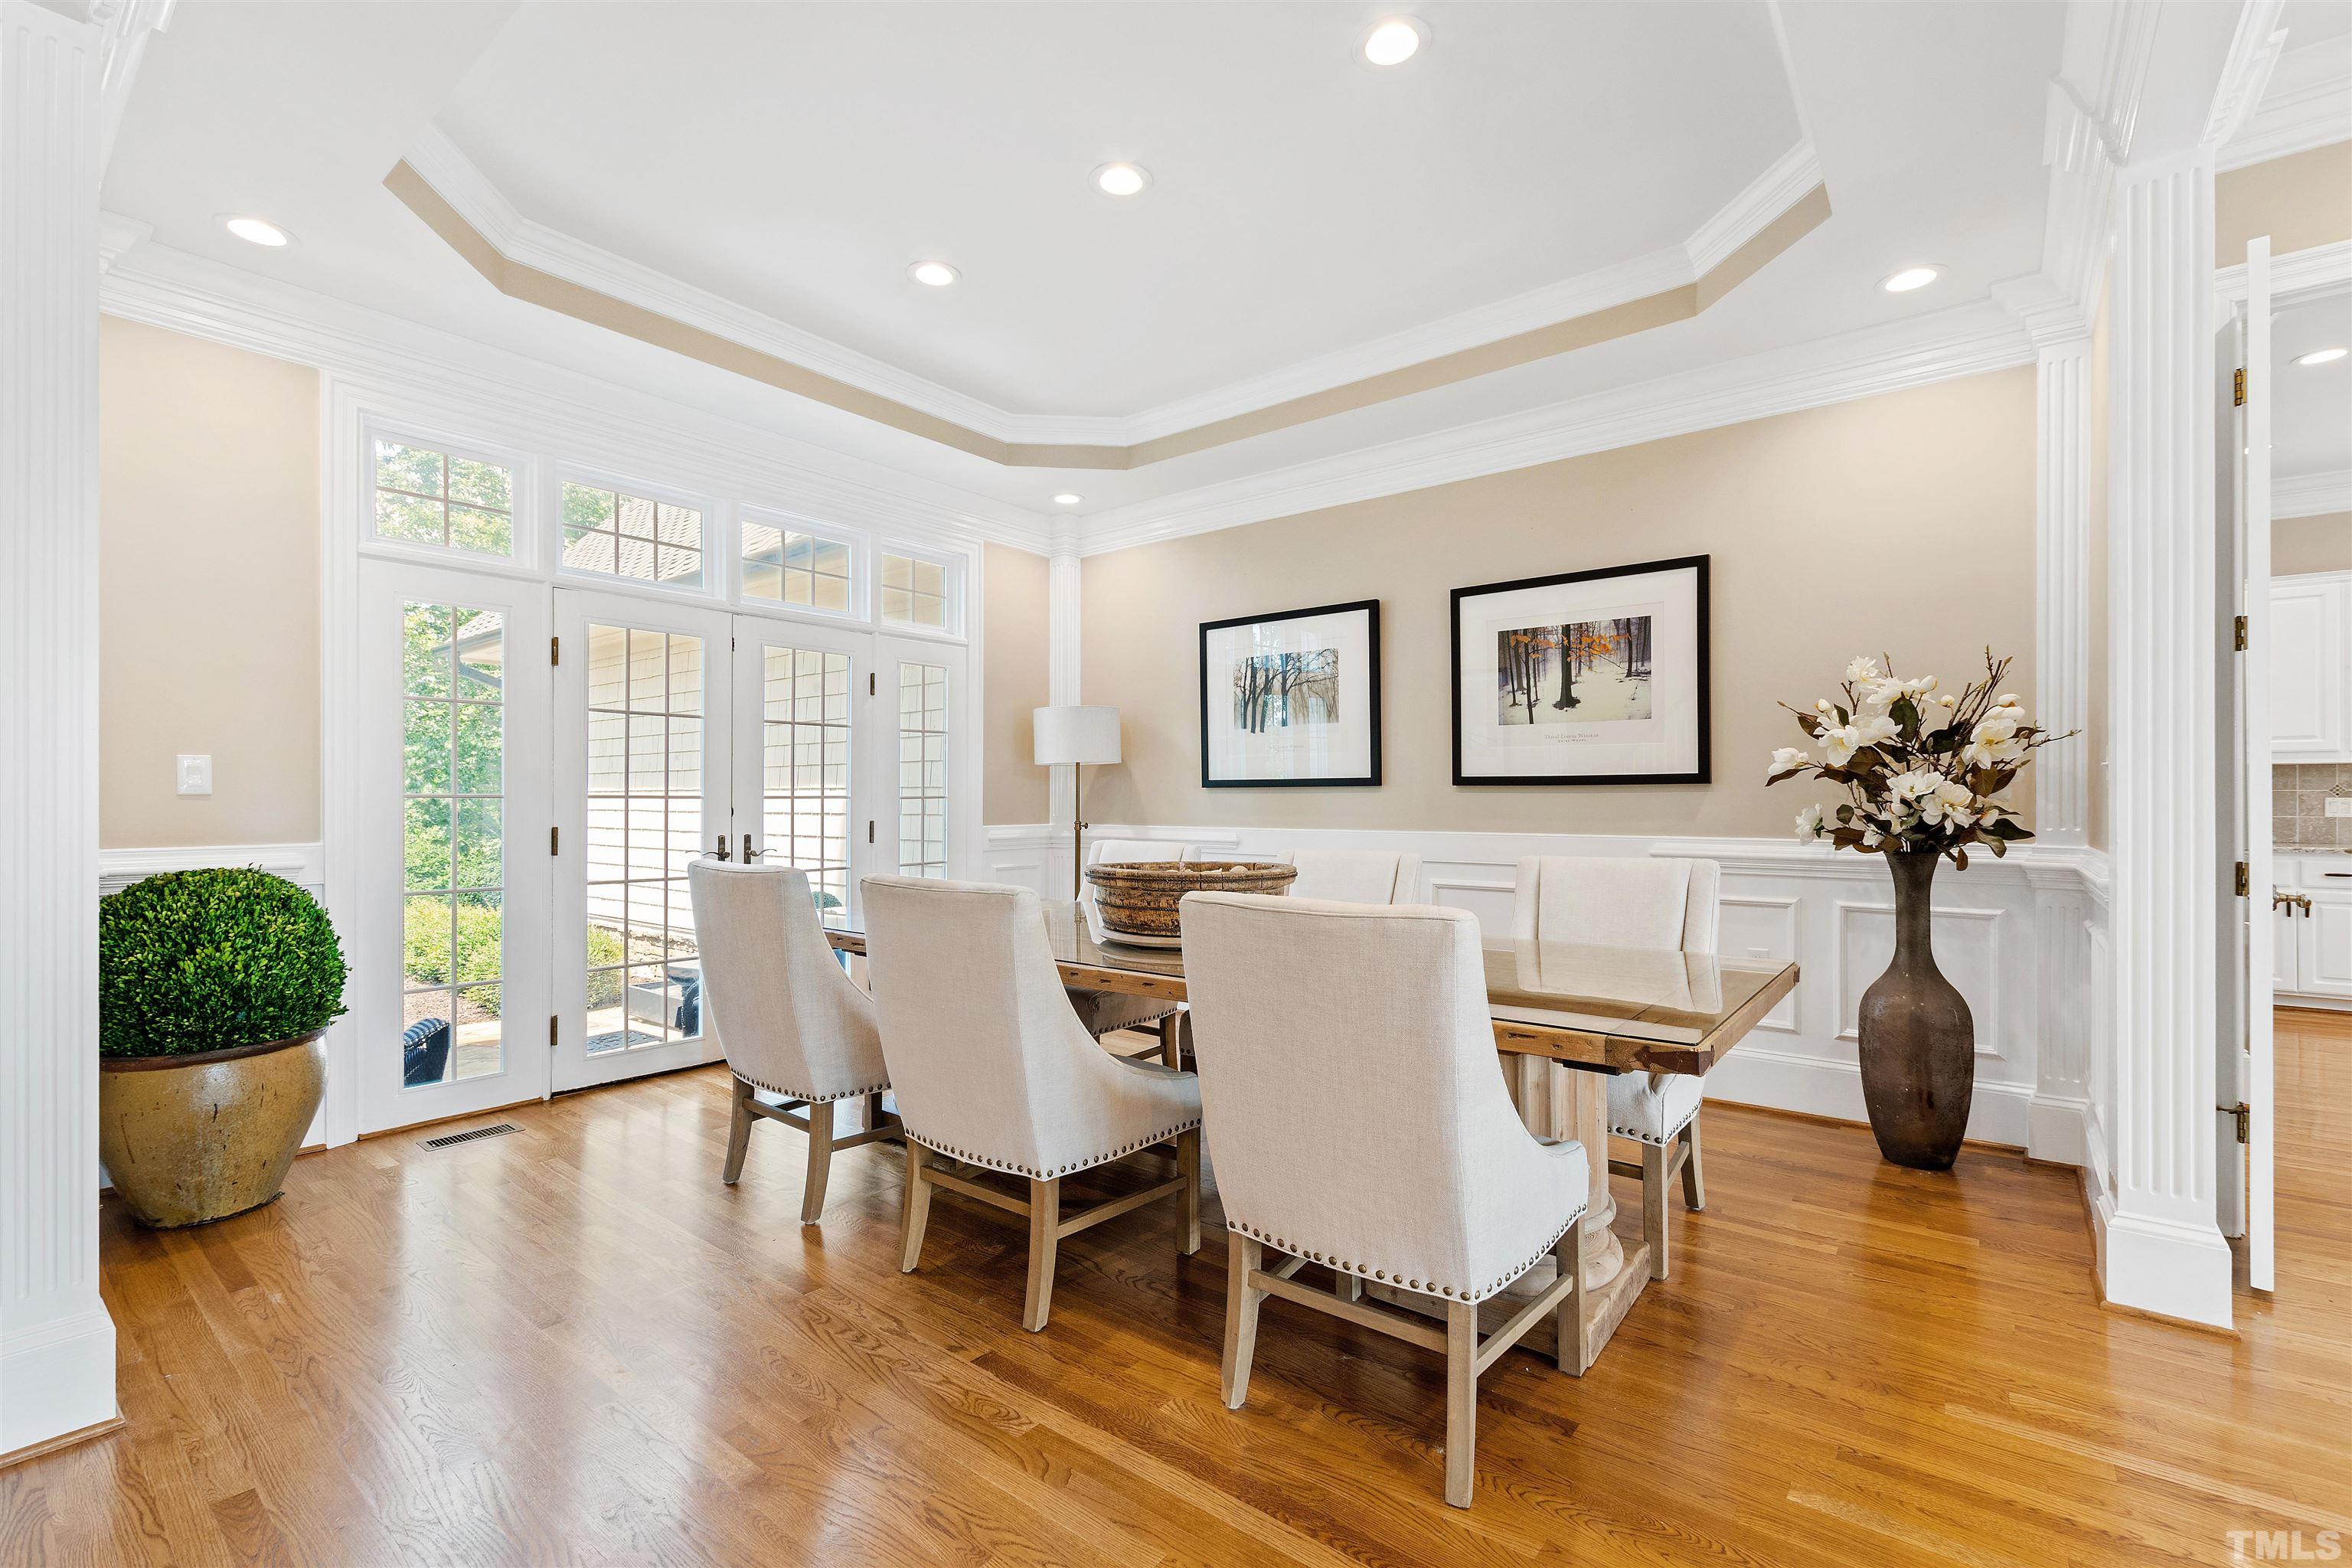 Separate Dining Room with tray ceiling, wainscoting